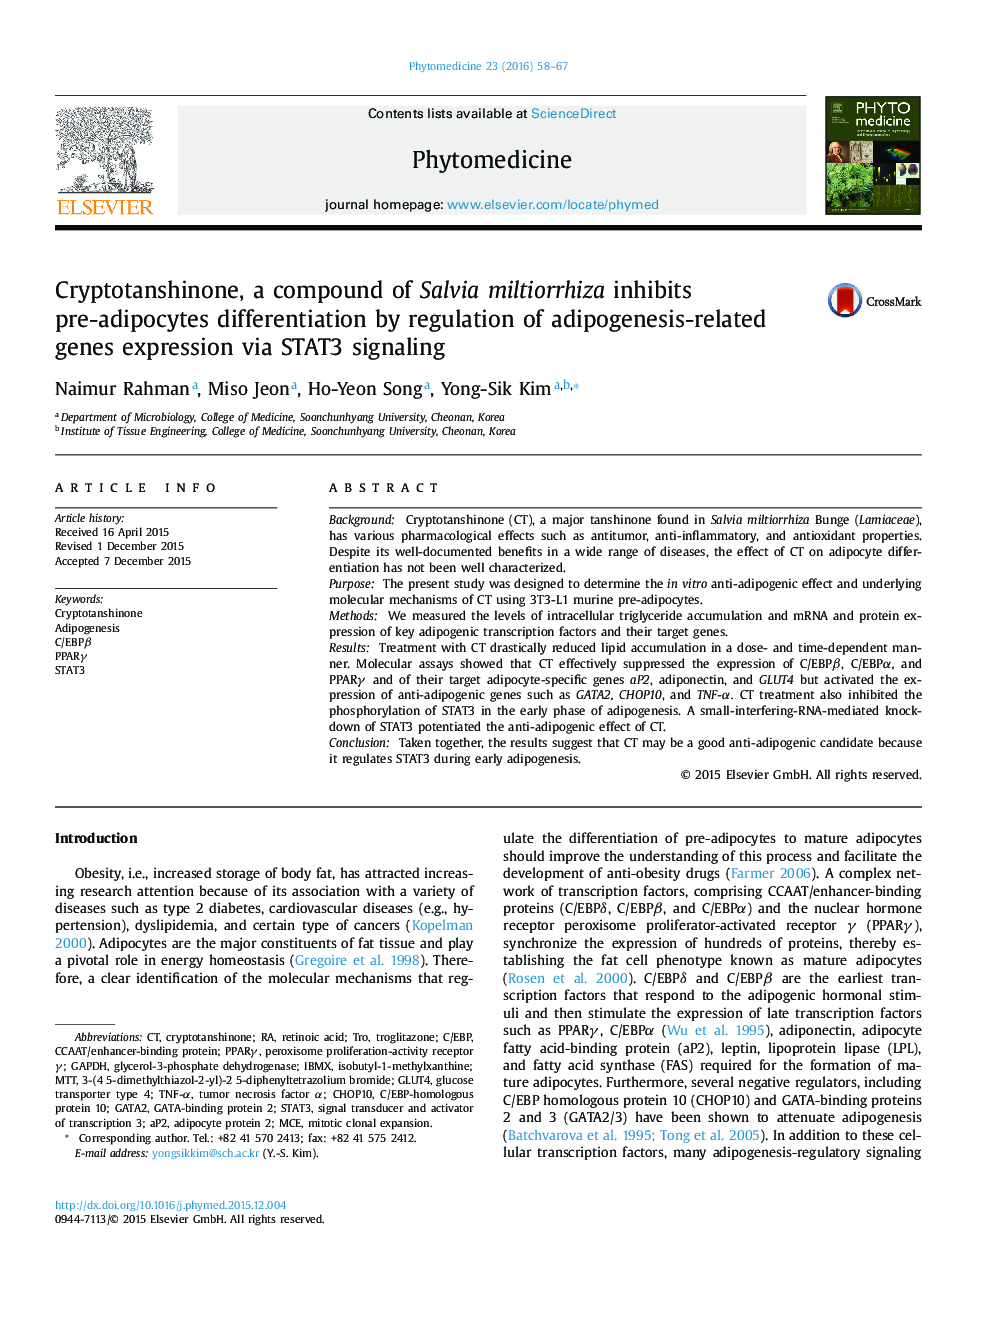 Cryptotanshinone, a compound of Salvia miltiorrhiza inhibits pre-adipocytes differentiation by regulation of adipogenesis-related genes expression via STAT3 signaling